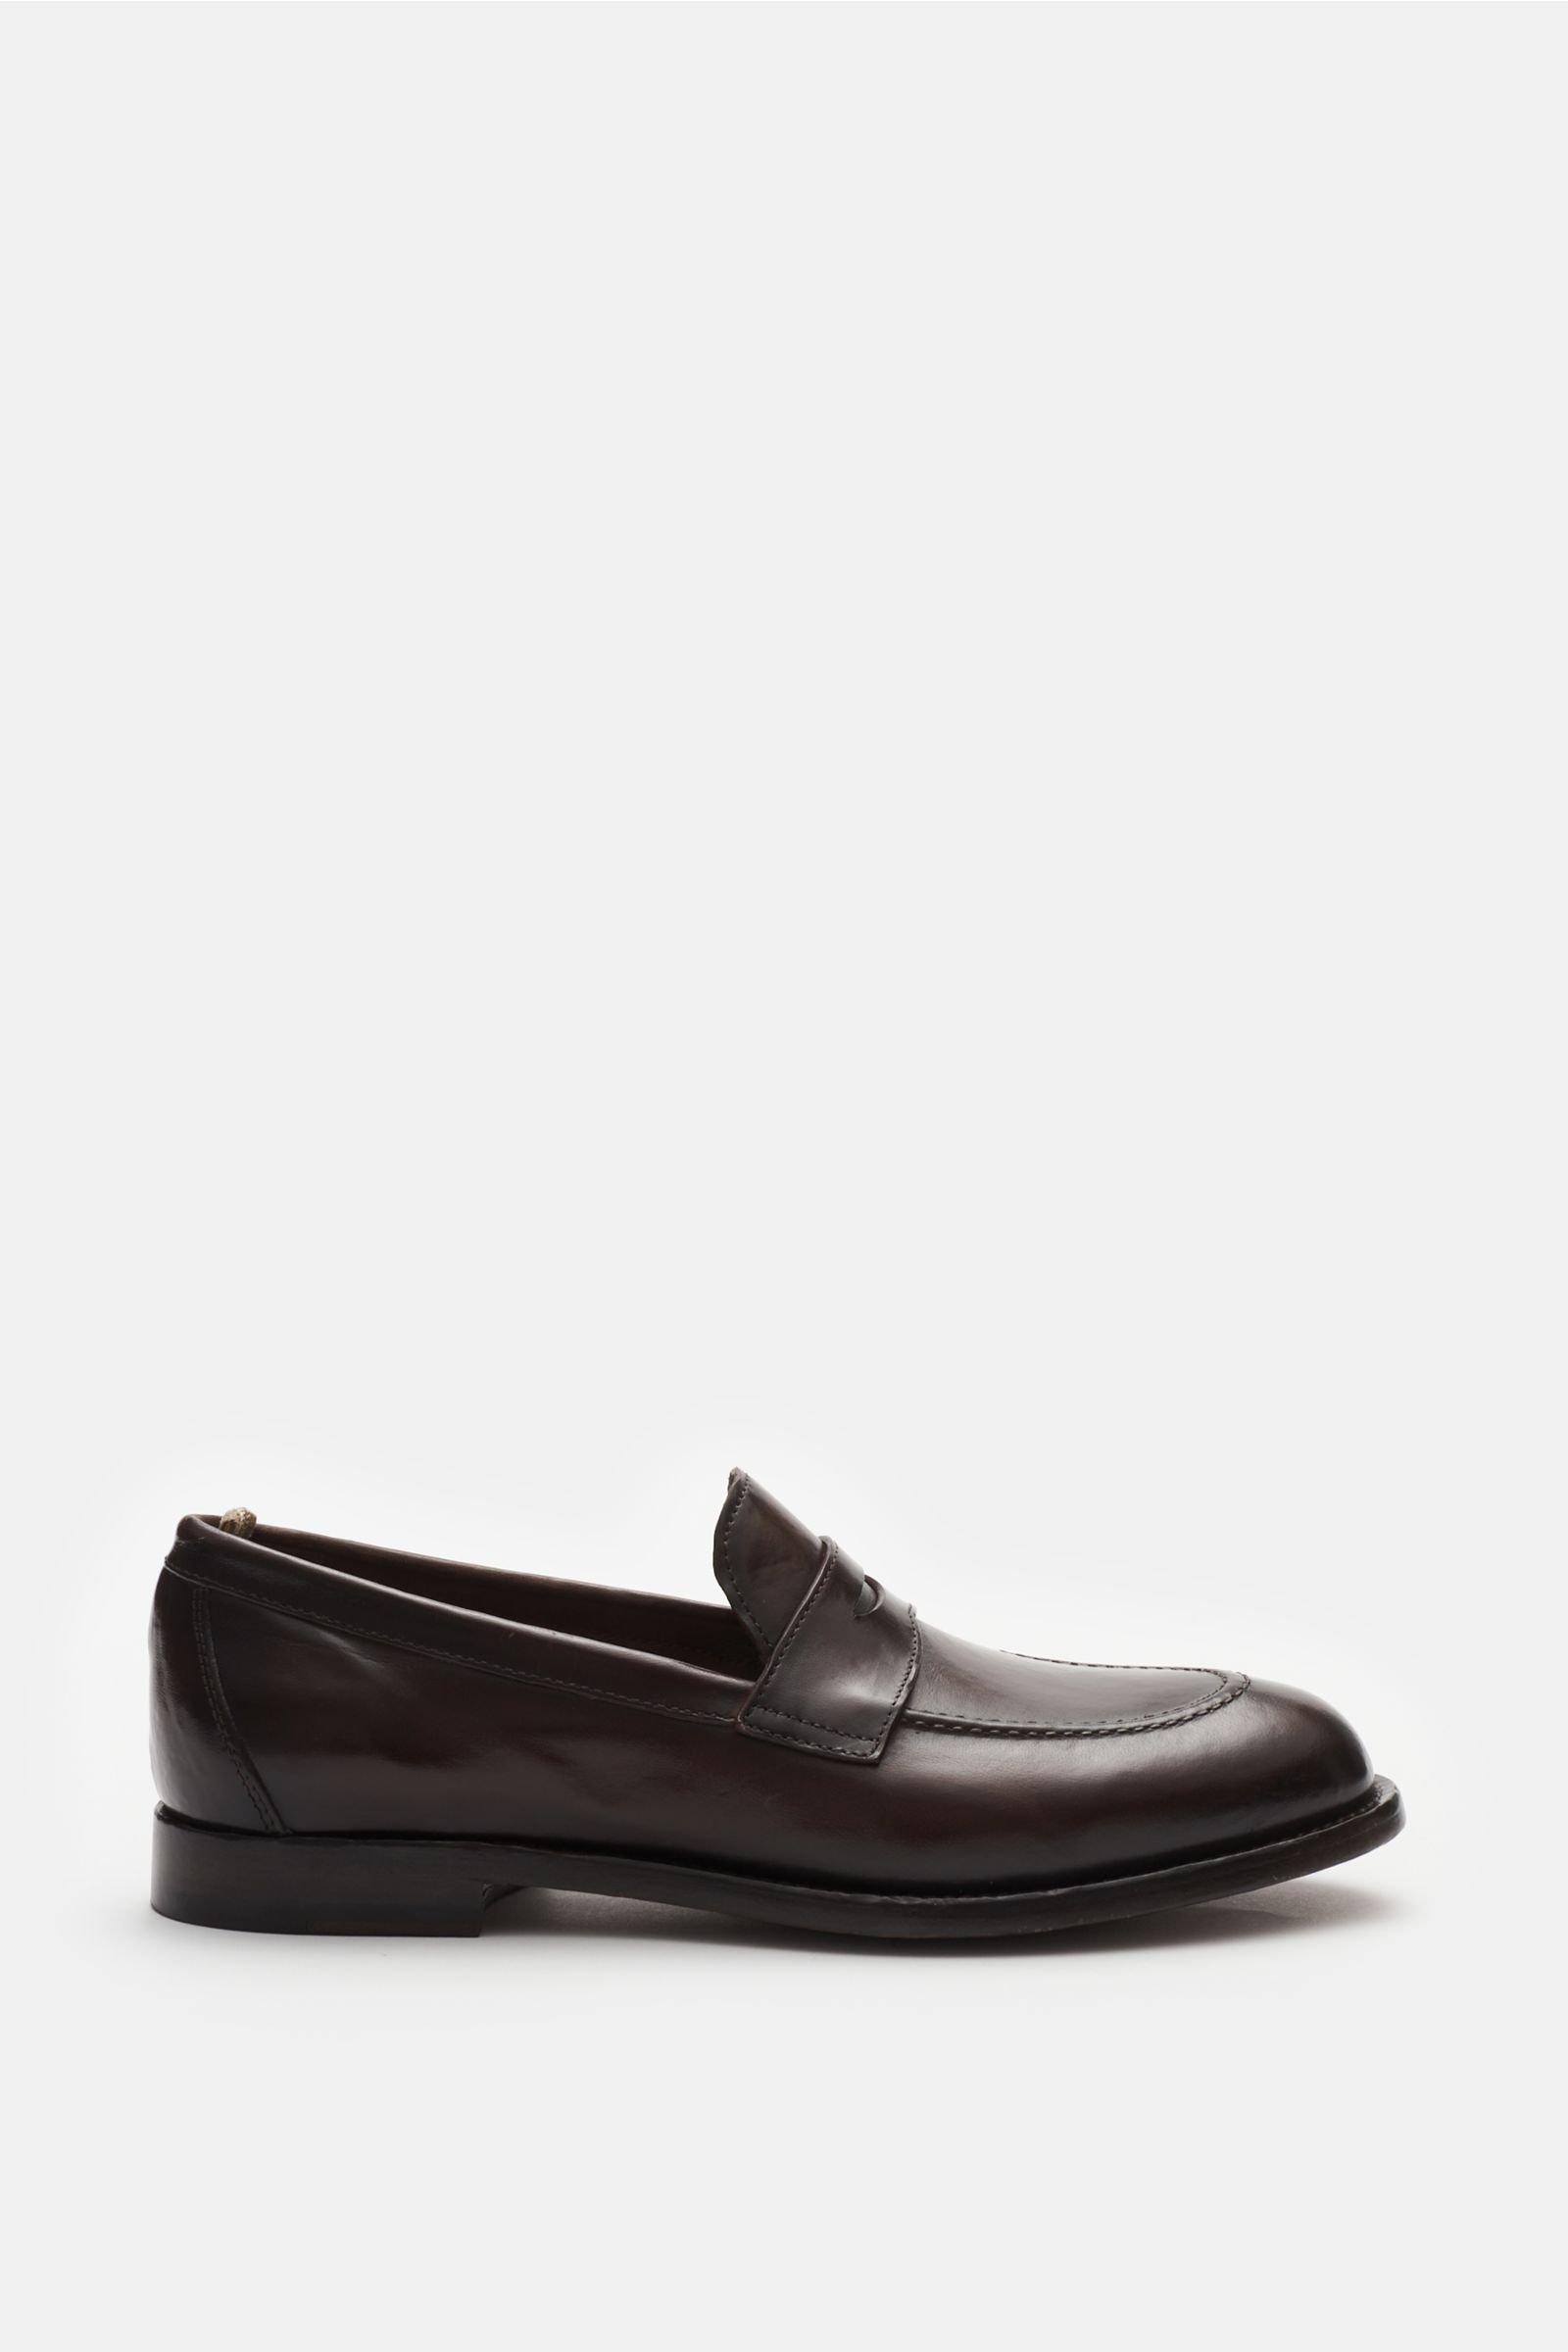 Penny loafers 'Ivy 002' dark brown